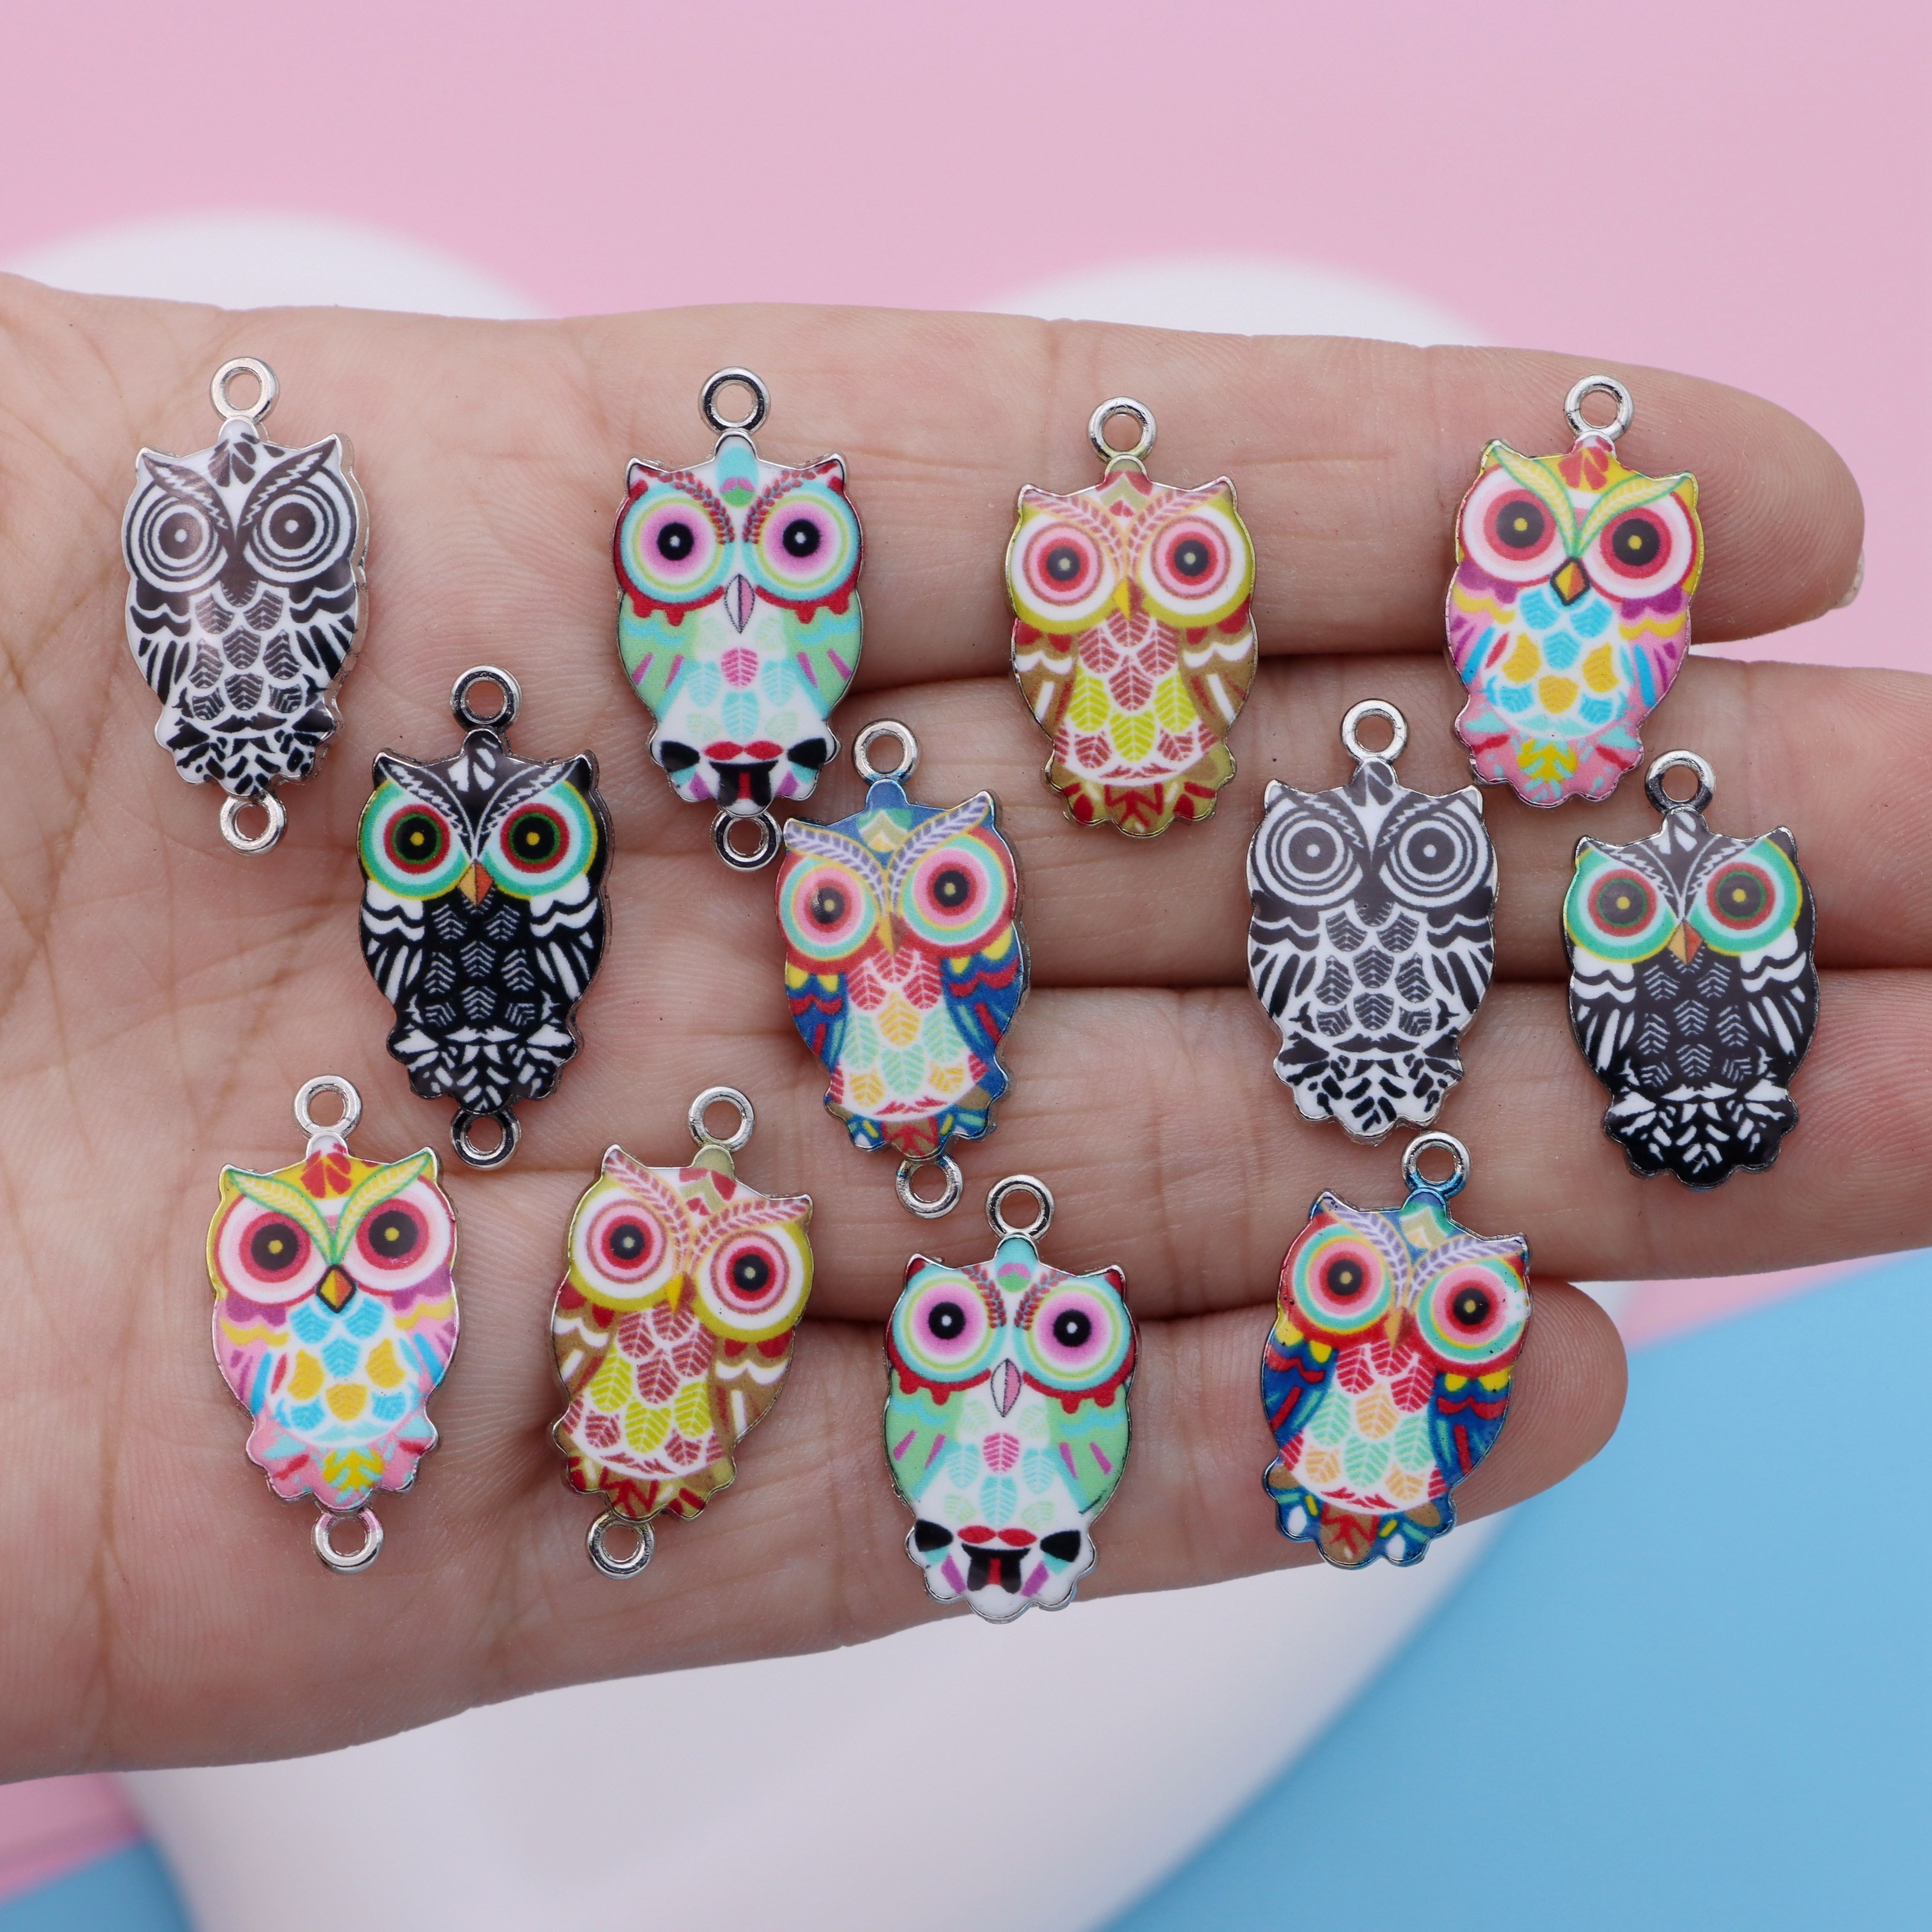 50pcs/lot Mixed Vintage Metal Animal Birds Charms Beads DIY Bracelet Pendant  Necklace Accessories For Jewelry Making Findings